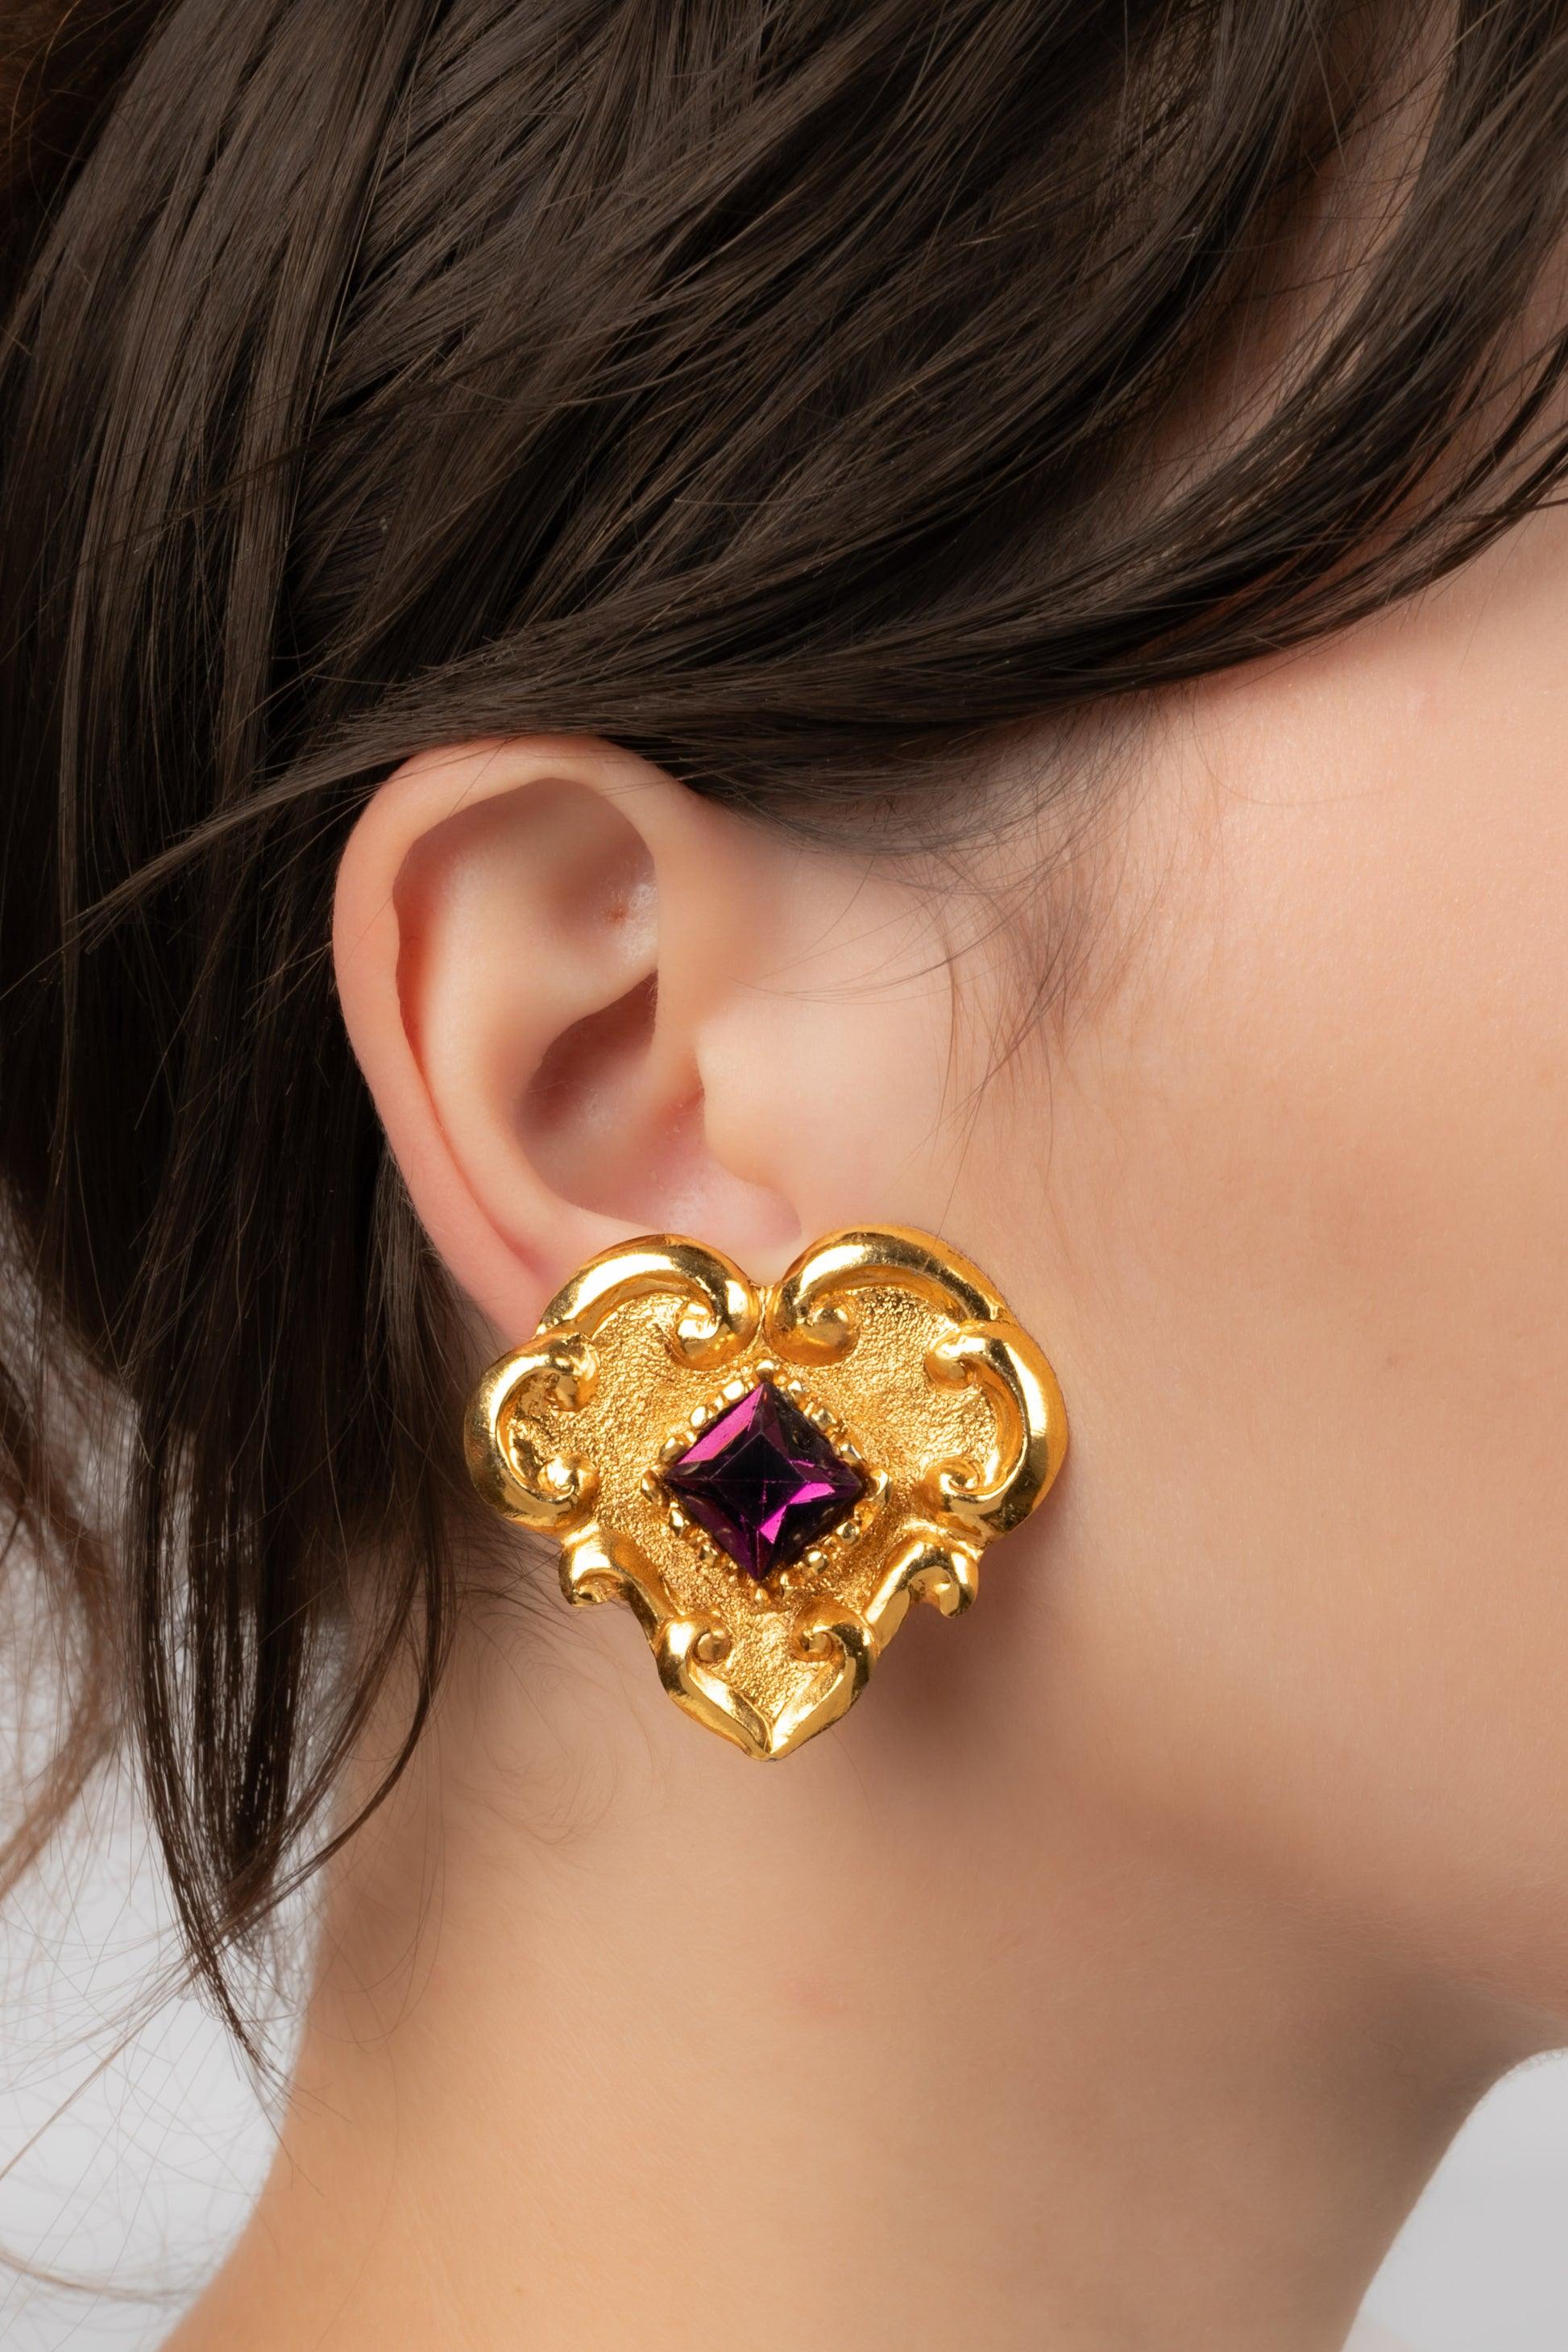 Christian Lacroix - (Made in France) Golden metal earrings topped with a purple rhinestone.

Additional information:
Condition: Very good condition
Dimensions: Height: 4 cm

Seller Reference: BO165